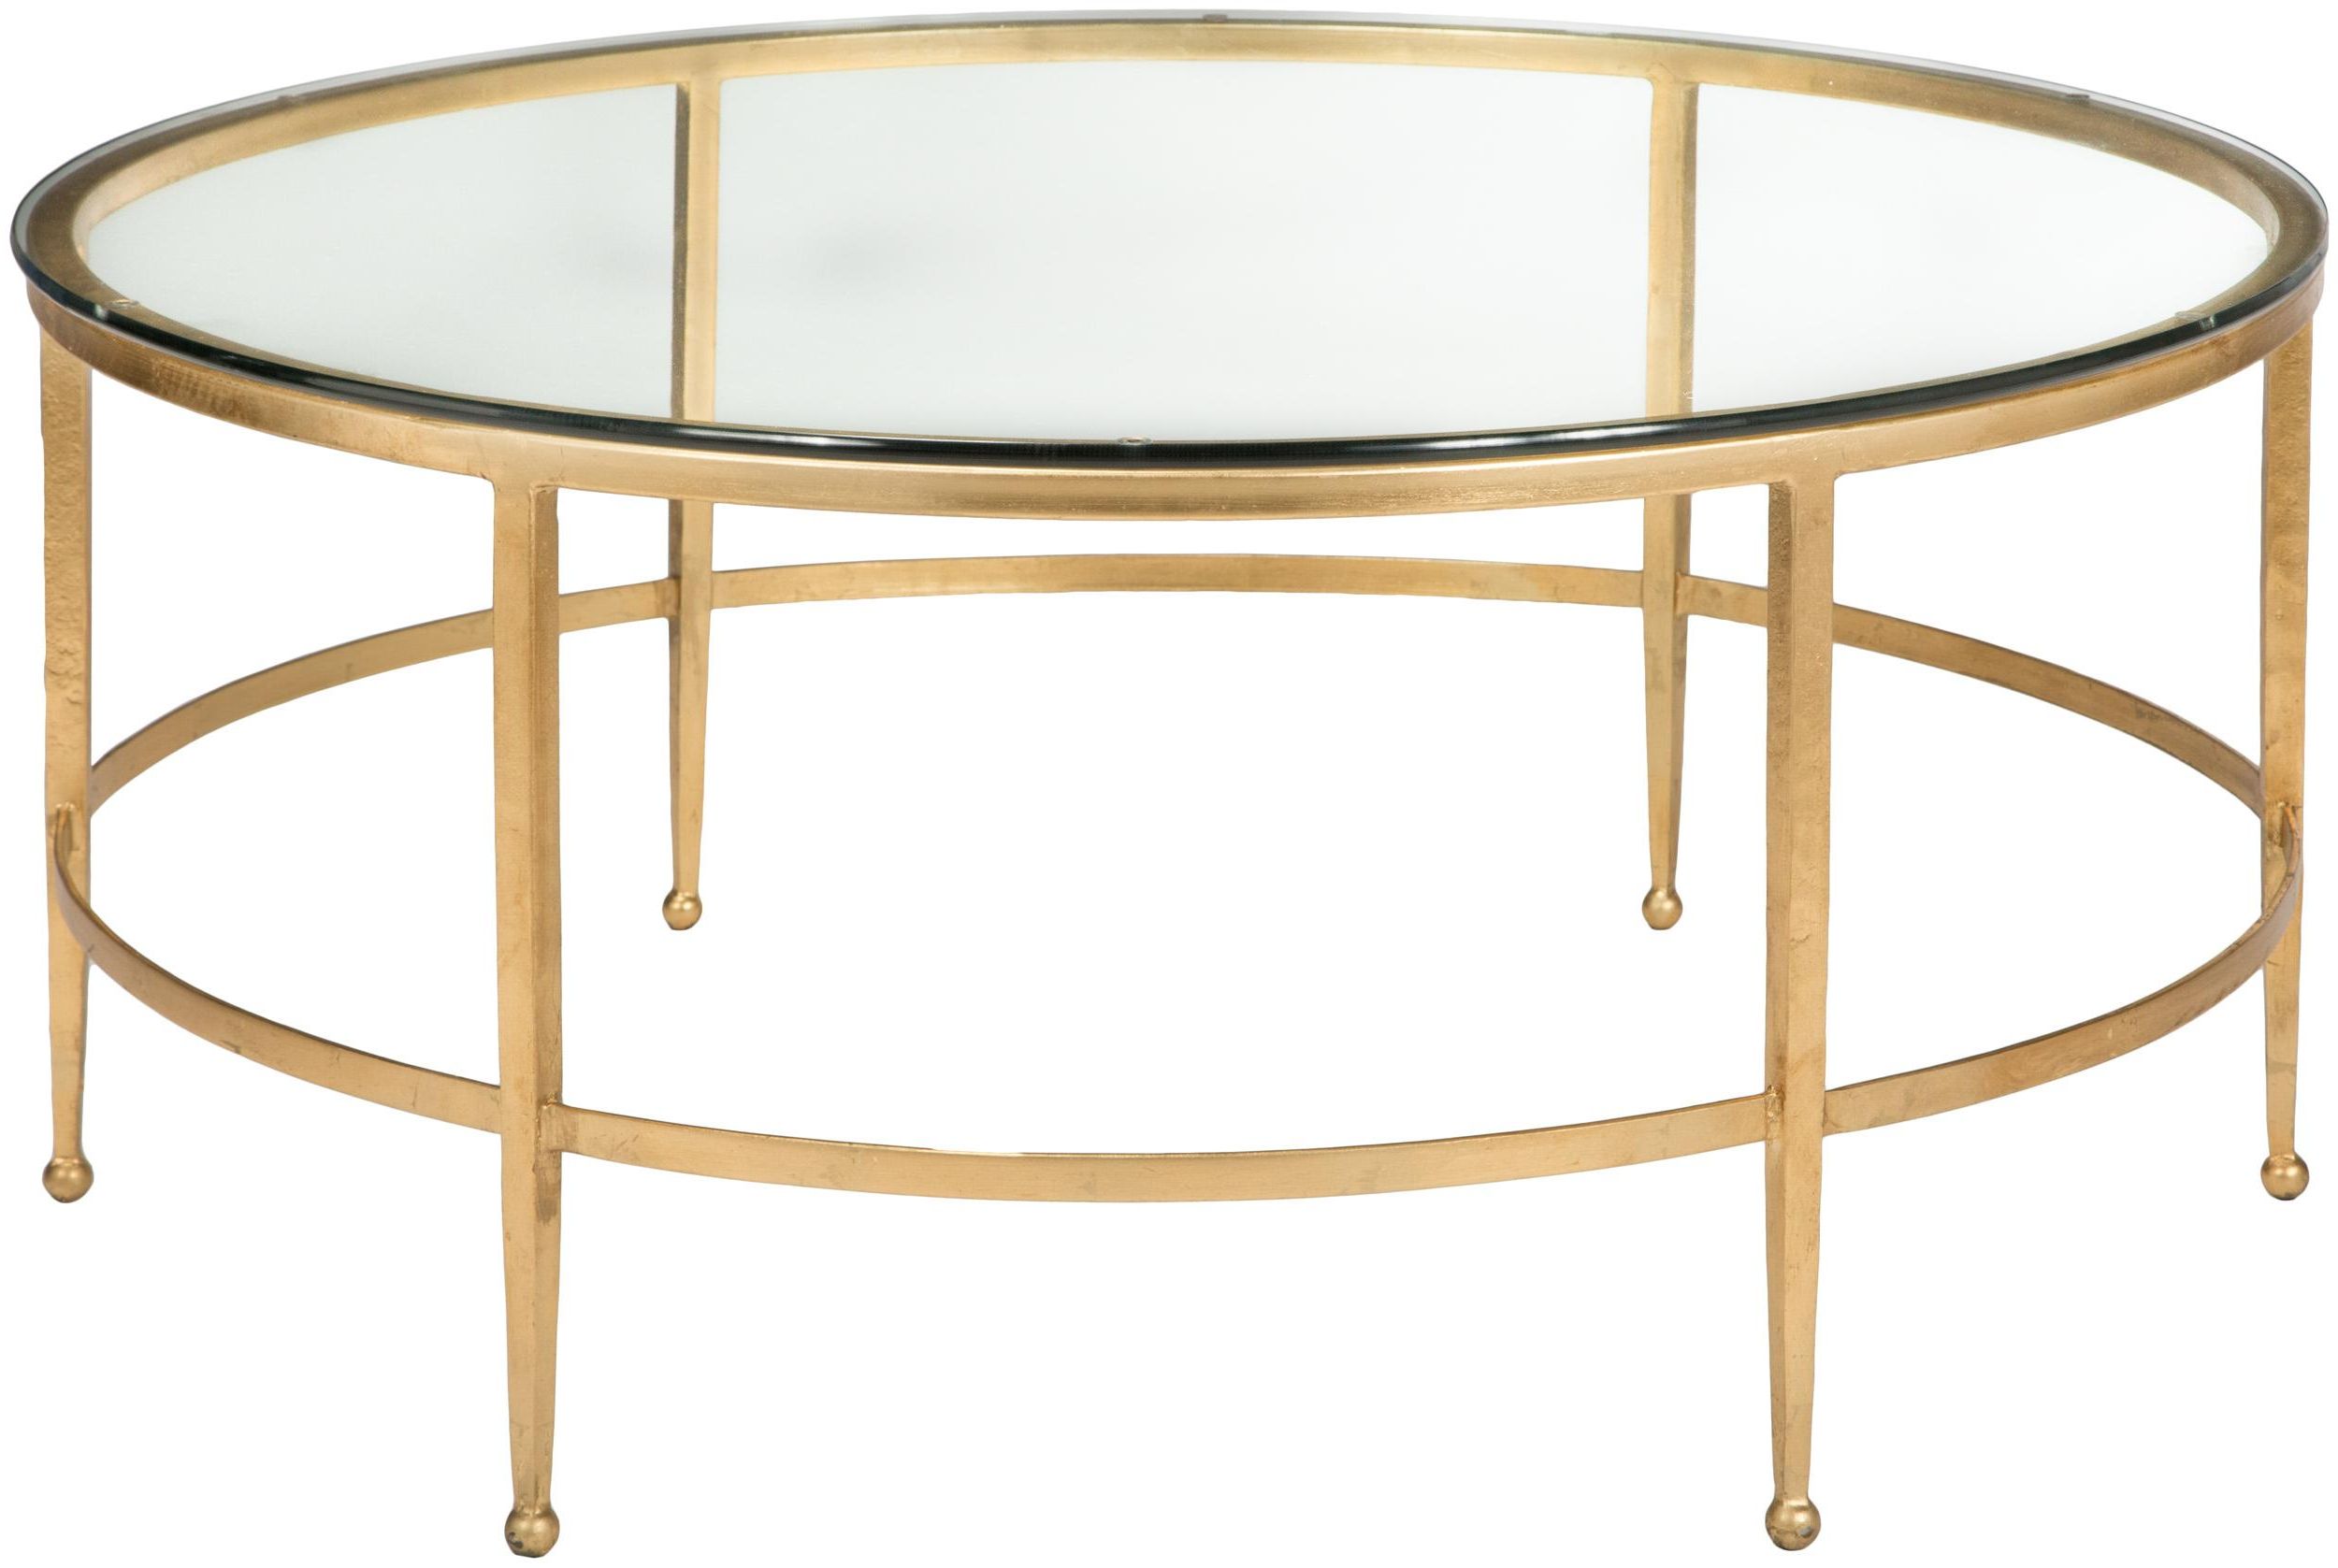 Widely Used Glass And Gold Coffee Tables With Regard To Safavieh Couture (Gallery 14 of 20)